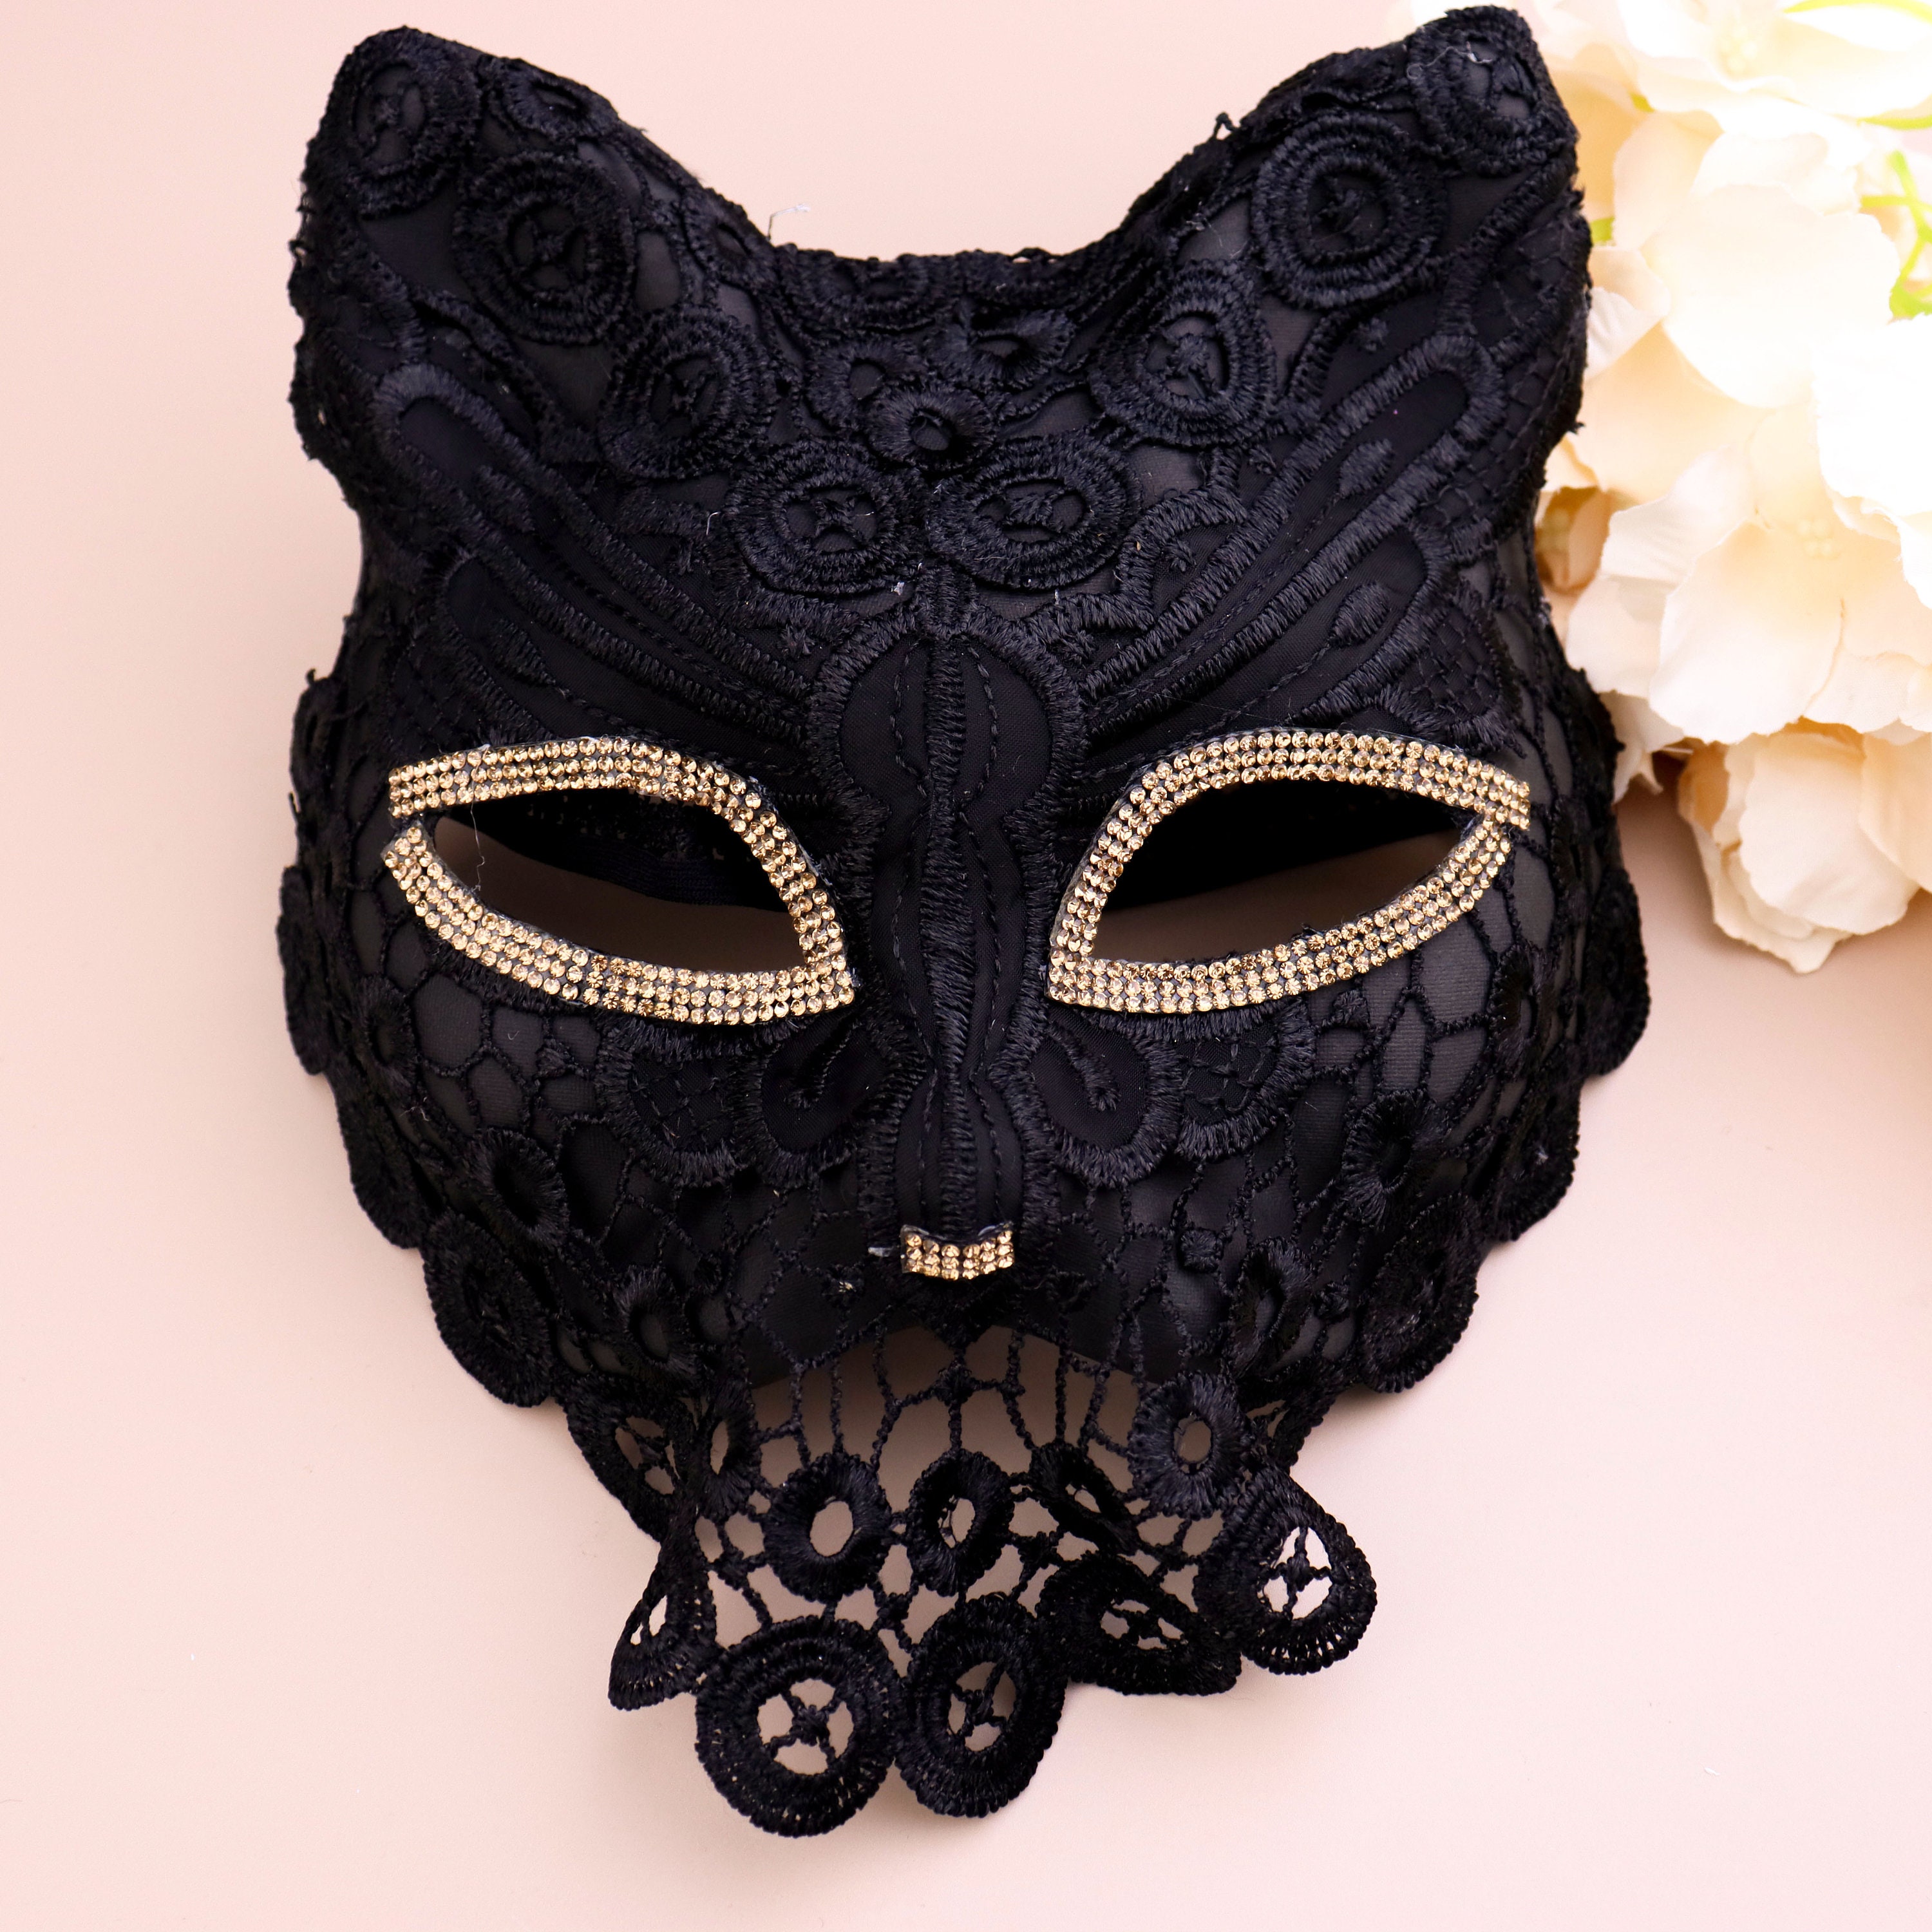 10 Pcs Cat Masks to Paint Paintable Cosplay Masquerade Vintage